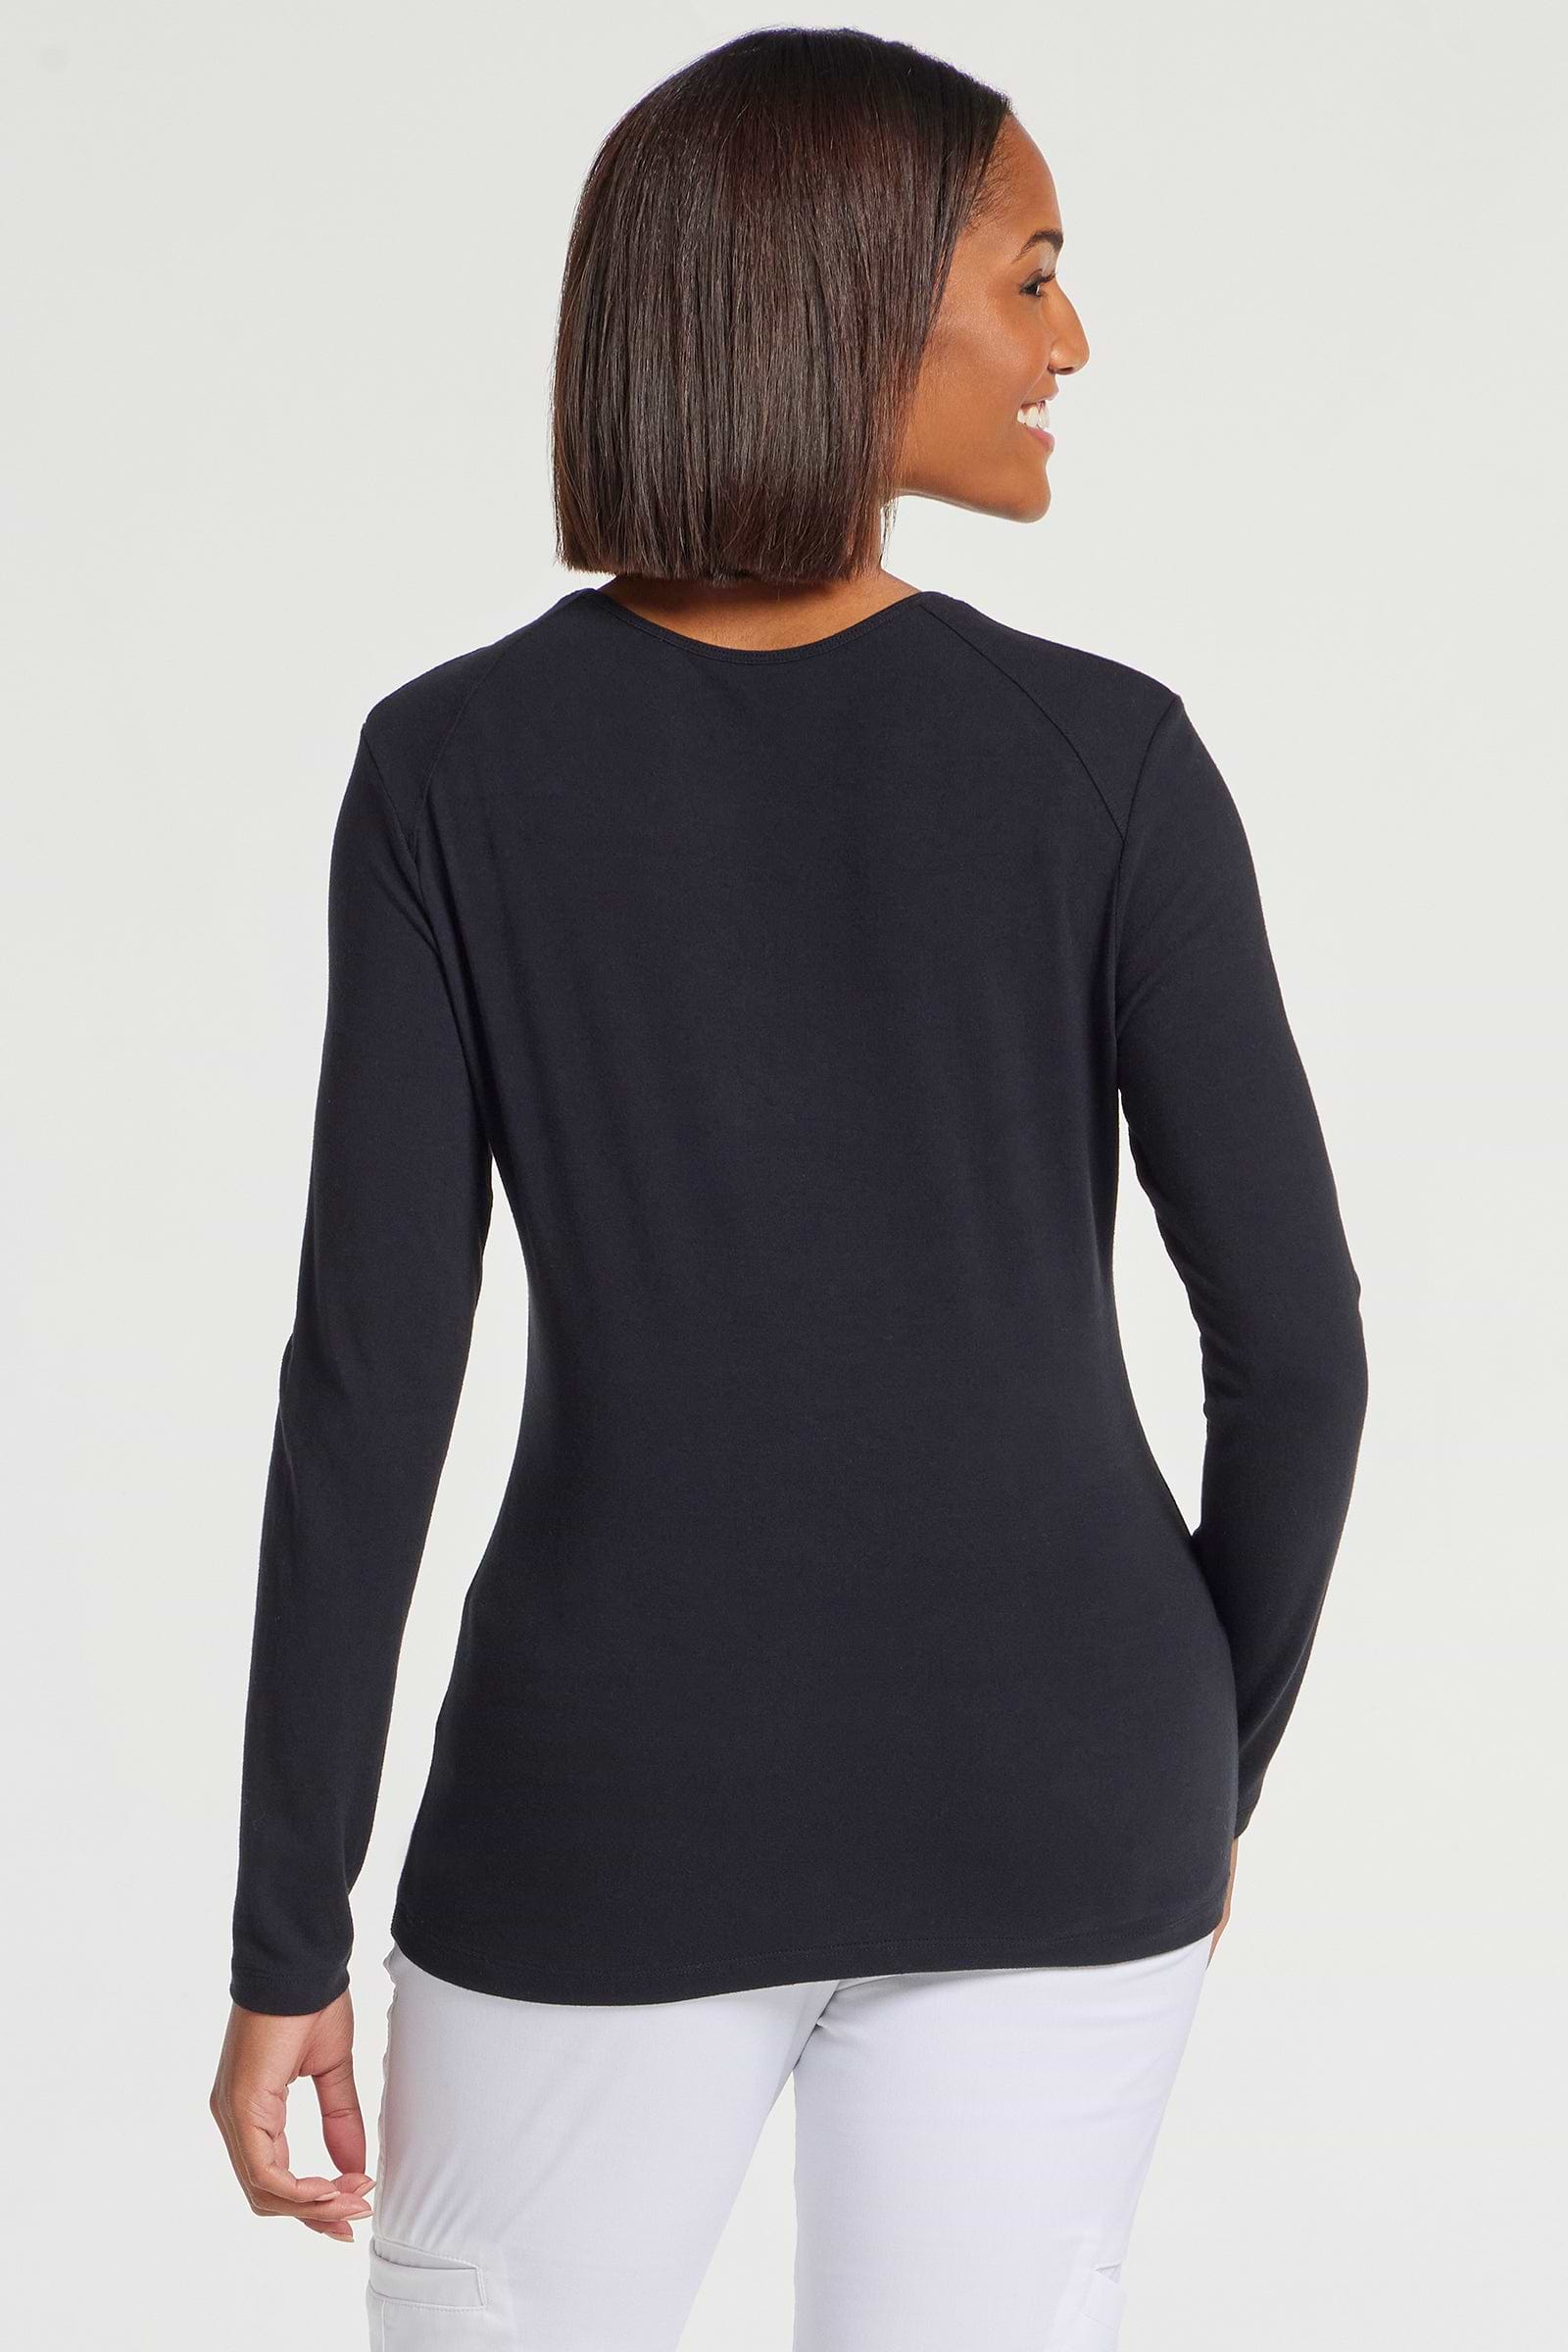 The Best Travel Top. Woman Showing the Back Profile of a Tony Pima Cotton Long-Sleeve Top in Black